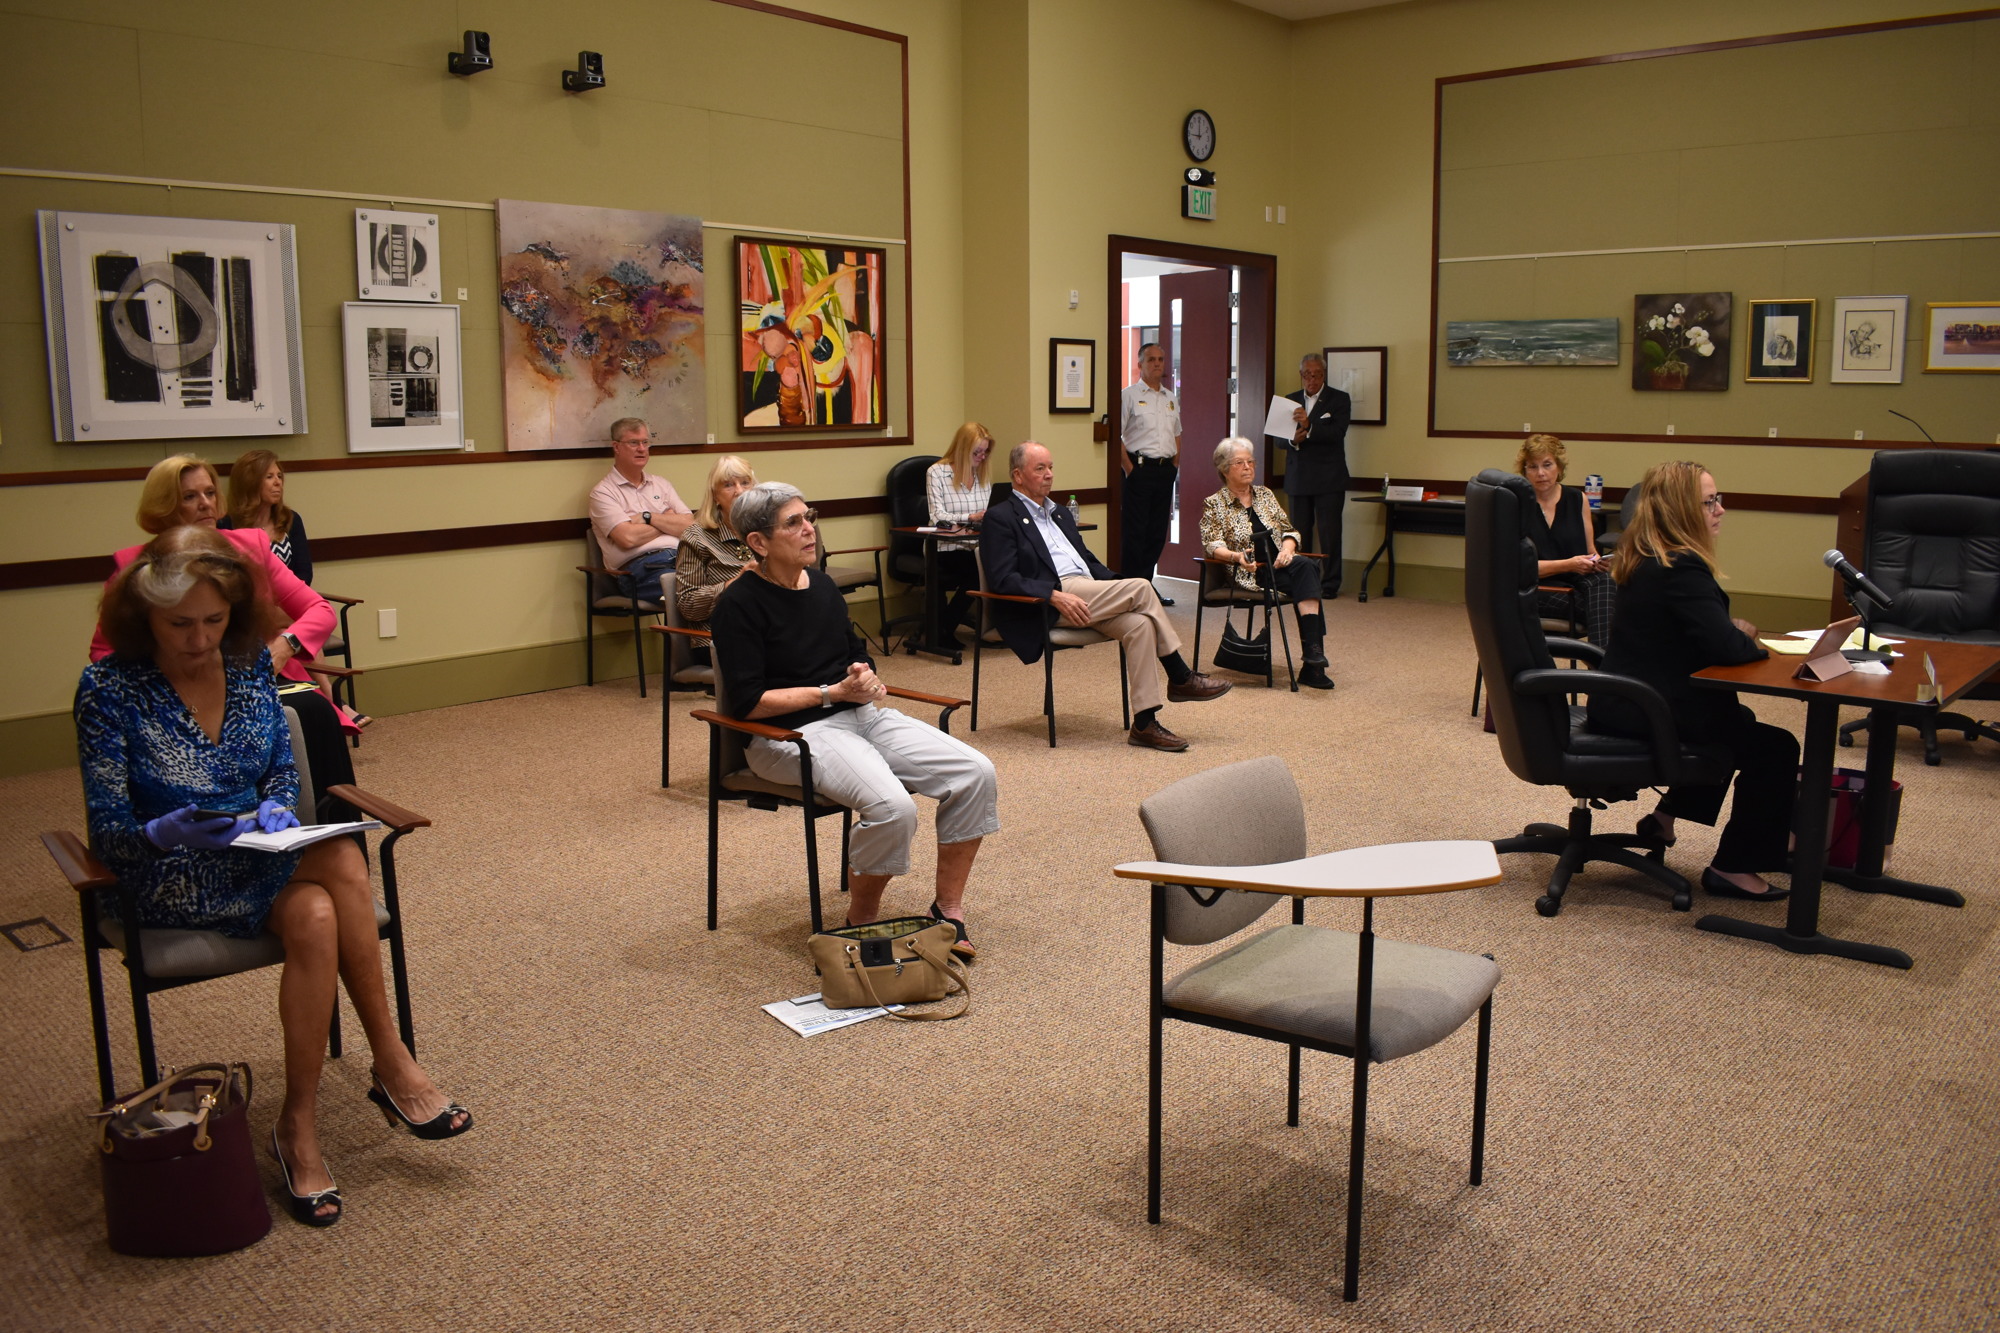 About 20 or so people attended the Longboat Key statutory meeting on March 23. Town staff did its best to space out the chairs to practice appropriate social distancing amid concerns about the coronavirus pandemic.